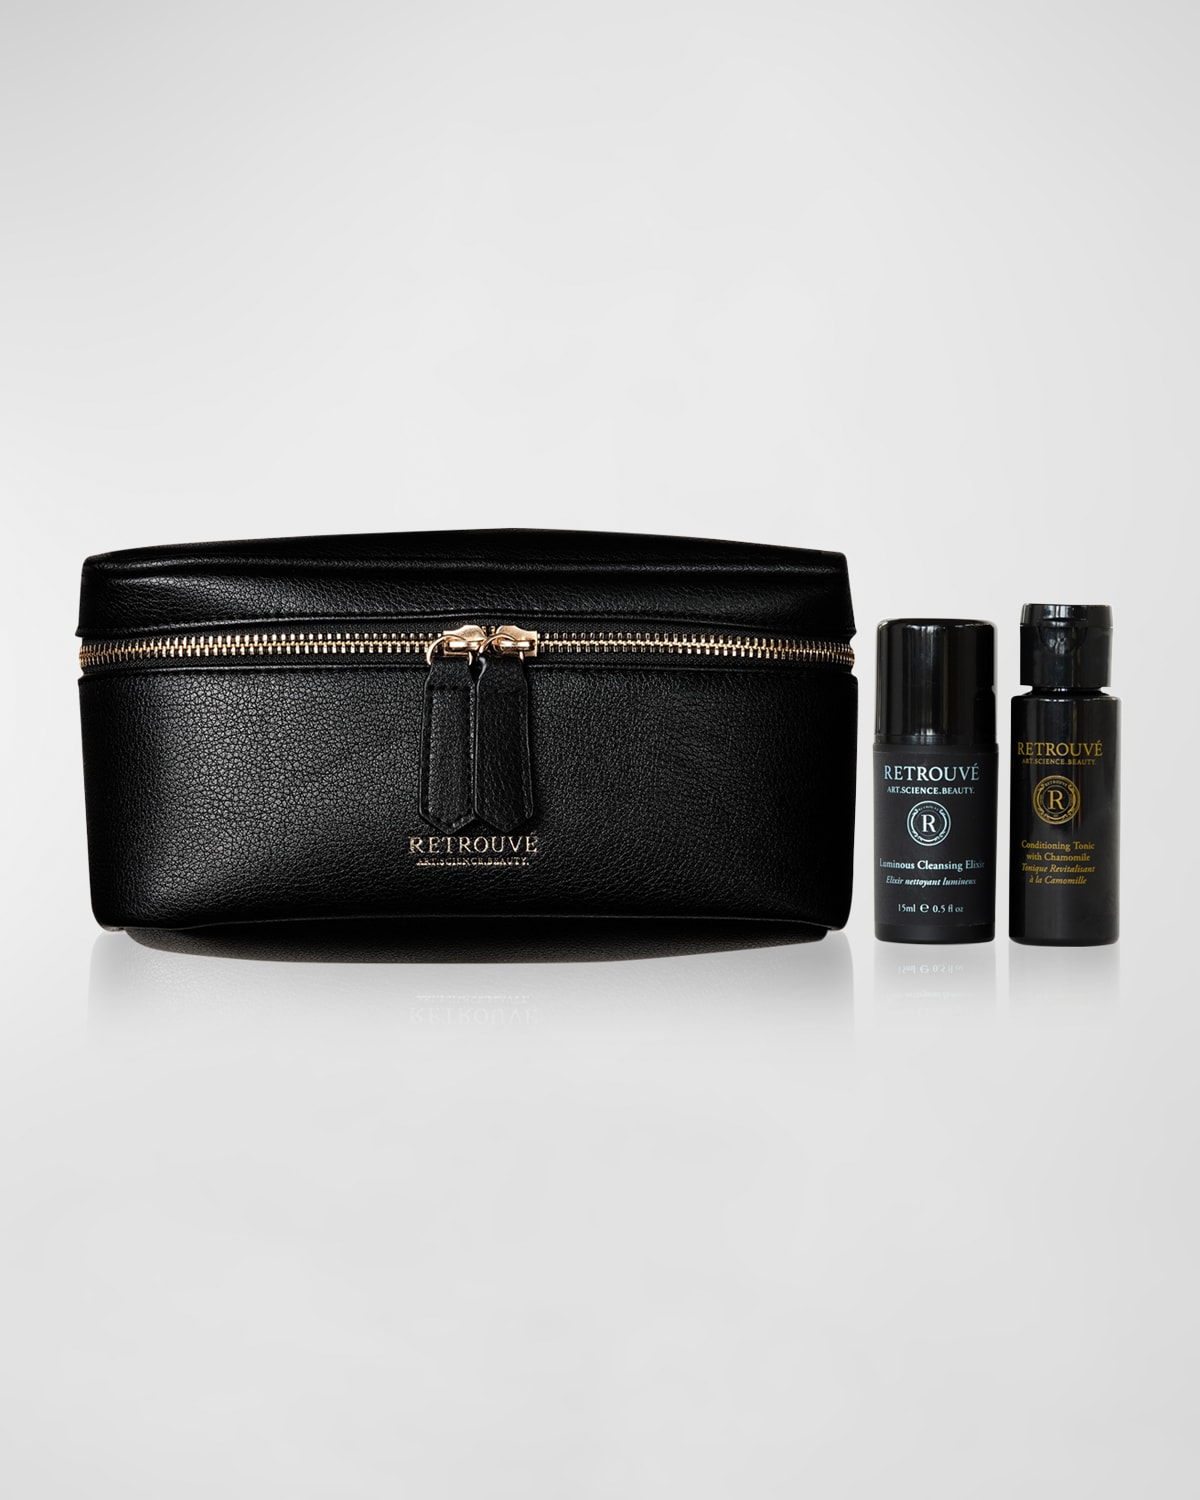 Vegan Pebbled Leather Cosmetic Bag, Luminous Cleansing Elixir 15mL and Conditioning Tonic with Chamomile 1 oz., Yours when you spend $250